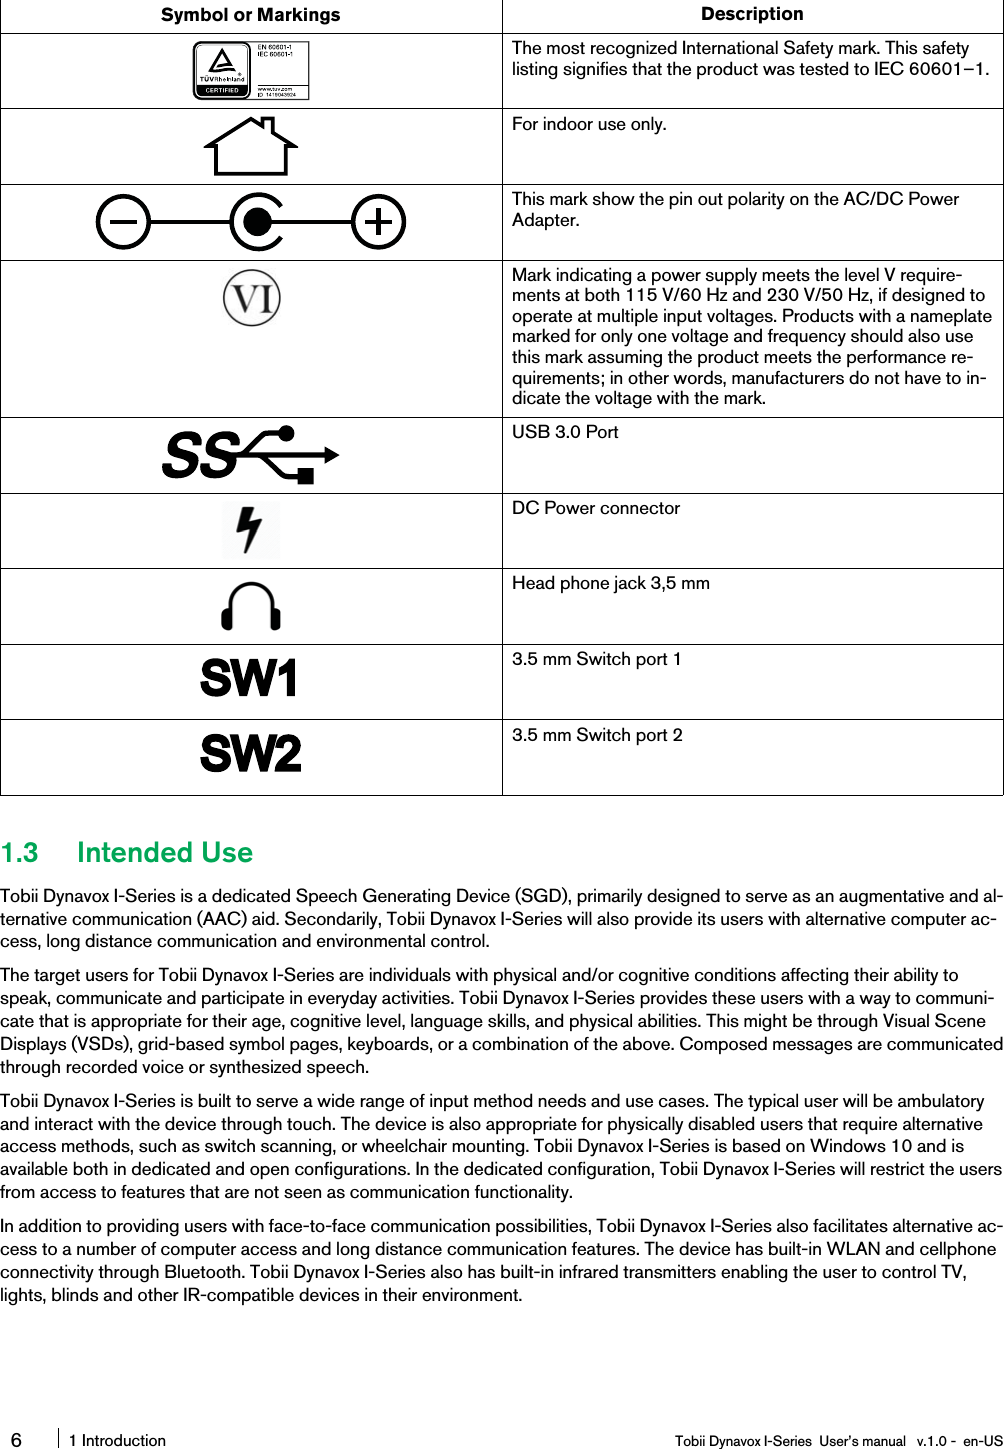 Symbol or Markings DescriptionThe most recognized International Safety mark. This safetylisting signifies that the product was tested to IEC 60601–1.For indoor use only.This mark show the pin out polarity on the AC/DC PowerAdapter.Mark indicating a power supply meets the level V require-ments at both 115 V/60 Hz and 230 V/50 Hz, if designed tooperate at multiple input voltages. Products with a nameplatemarked for only one voltage and frequency should also usethis mark assuming the product meets the performance re-quirements; in other words, manufacturers do not have to in-dicate the voltage with the mark.USB 3.0 PortDC Power connectorHead phone jack 3,5 mm3.5 mm Switch port 13.5 mm Switch port 21.3 Intended UseTobii Dynavox I-Series is a dedicated Speech Generating Device (SGD), primarily designed to serve as an augmentative and al-ternative communication (AAC) aid. Secondarily, Tobii Dynavox I-Series will also provide its users with alternative computer ac-cess, long distance communication and environmental control.The target users for Tobii Dynavox I-Series are individuals with physical and/or cognitive conditions affecting their ability tospeak, communicate and participate in everyday activities. Tobii Dynavox I-Series provides these users with a way to communi-cate that is appropriate for their age, cognitive level, language skills, and physical abilities. This might be through Visual SceneDisplays (VSDs), grid-based symbol pages, keyboards, or a combination of the above. Composed messages are communicatedthrough recorded voice or synthesized speech.Tobii Dynavox I-Series is built to serve a wide range of input method needs and use cases. The typical user will be ambulatoryand interact with the device through touch. The device is also appropriate for physically disabled users that require alternativeaccess methods, such as switch scanning, or wheelchair mounting. Tobii Dynavox I-Series is based on Windows 10 and isavailable both in dedicated and open configurations. In the dedicated configuration, Tobii Dynavox I-Series will restrict the usersfrom access to features that are not seen as communication functionality.In addition to providing users with face-to-face communication possibilities, Tobii Dynavox I-Series also facilitates alternative ac-cess to a number of computer access and long distance communication features. The device has built-in WLAN and cellphoneconnectivity through Bluetooth. Tobii Dynavox I-Series also has built-in infrared transmitters enabling the user to control TV,lights, blinds and other IR-compatible devices in their environment.61 Introduction Tobii Dynavox I-Series User’s manual v.1.0 - en-US